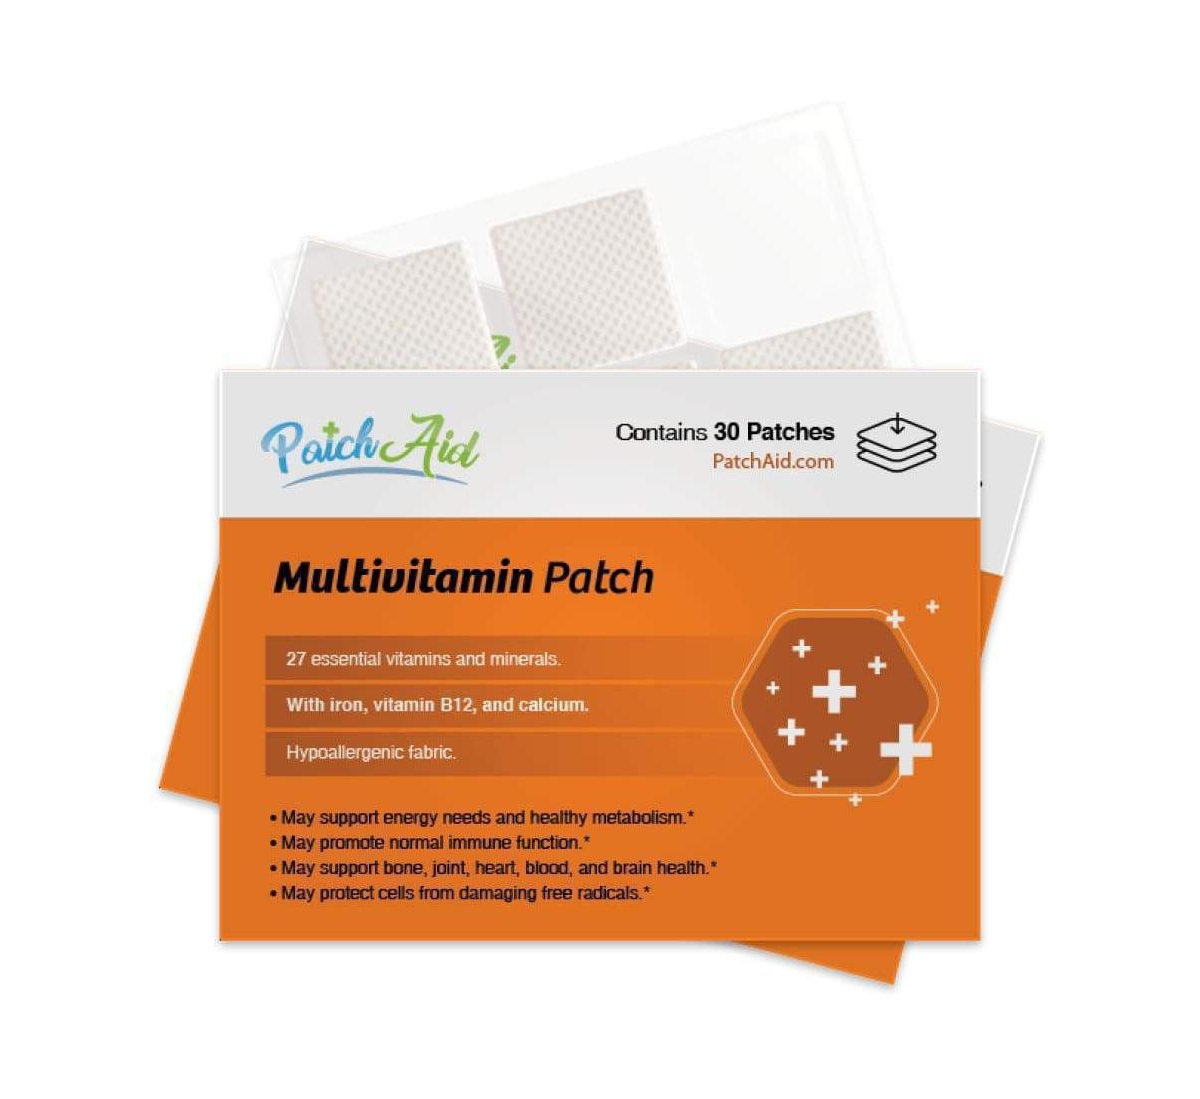 MultiVitamin Plus Topical Patch by PatchAid (30-Day Supply) - White